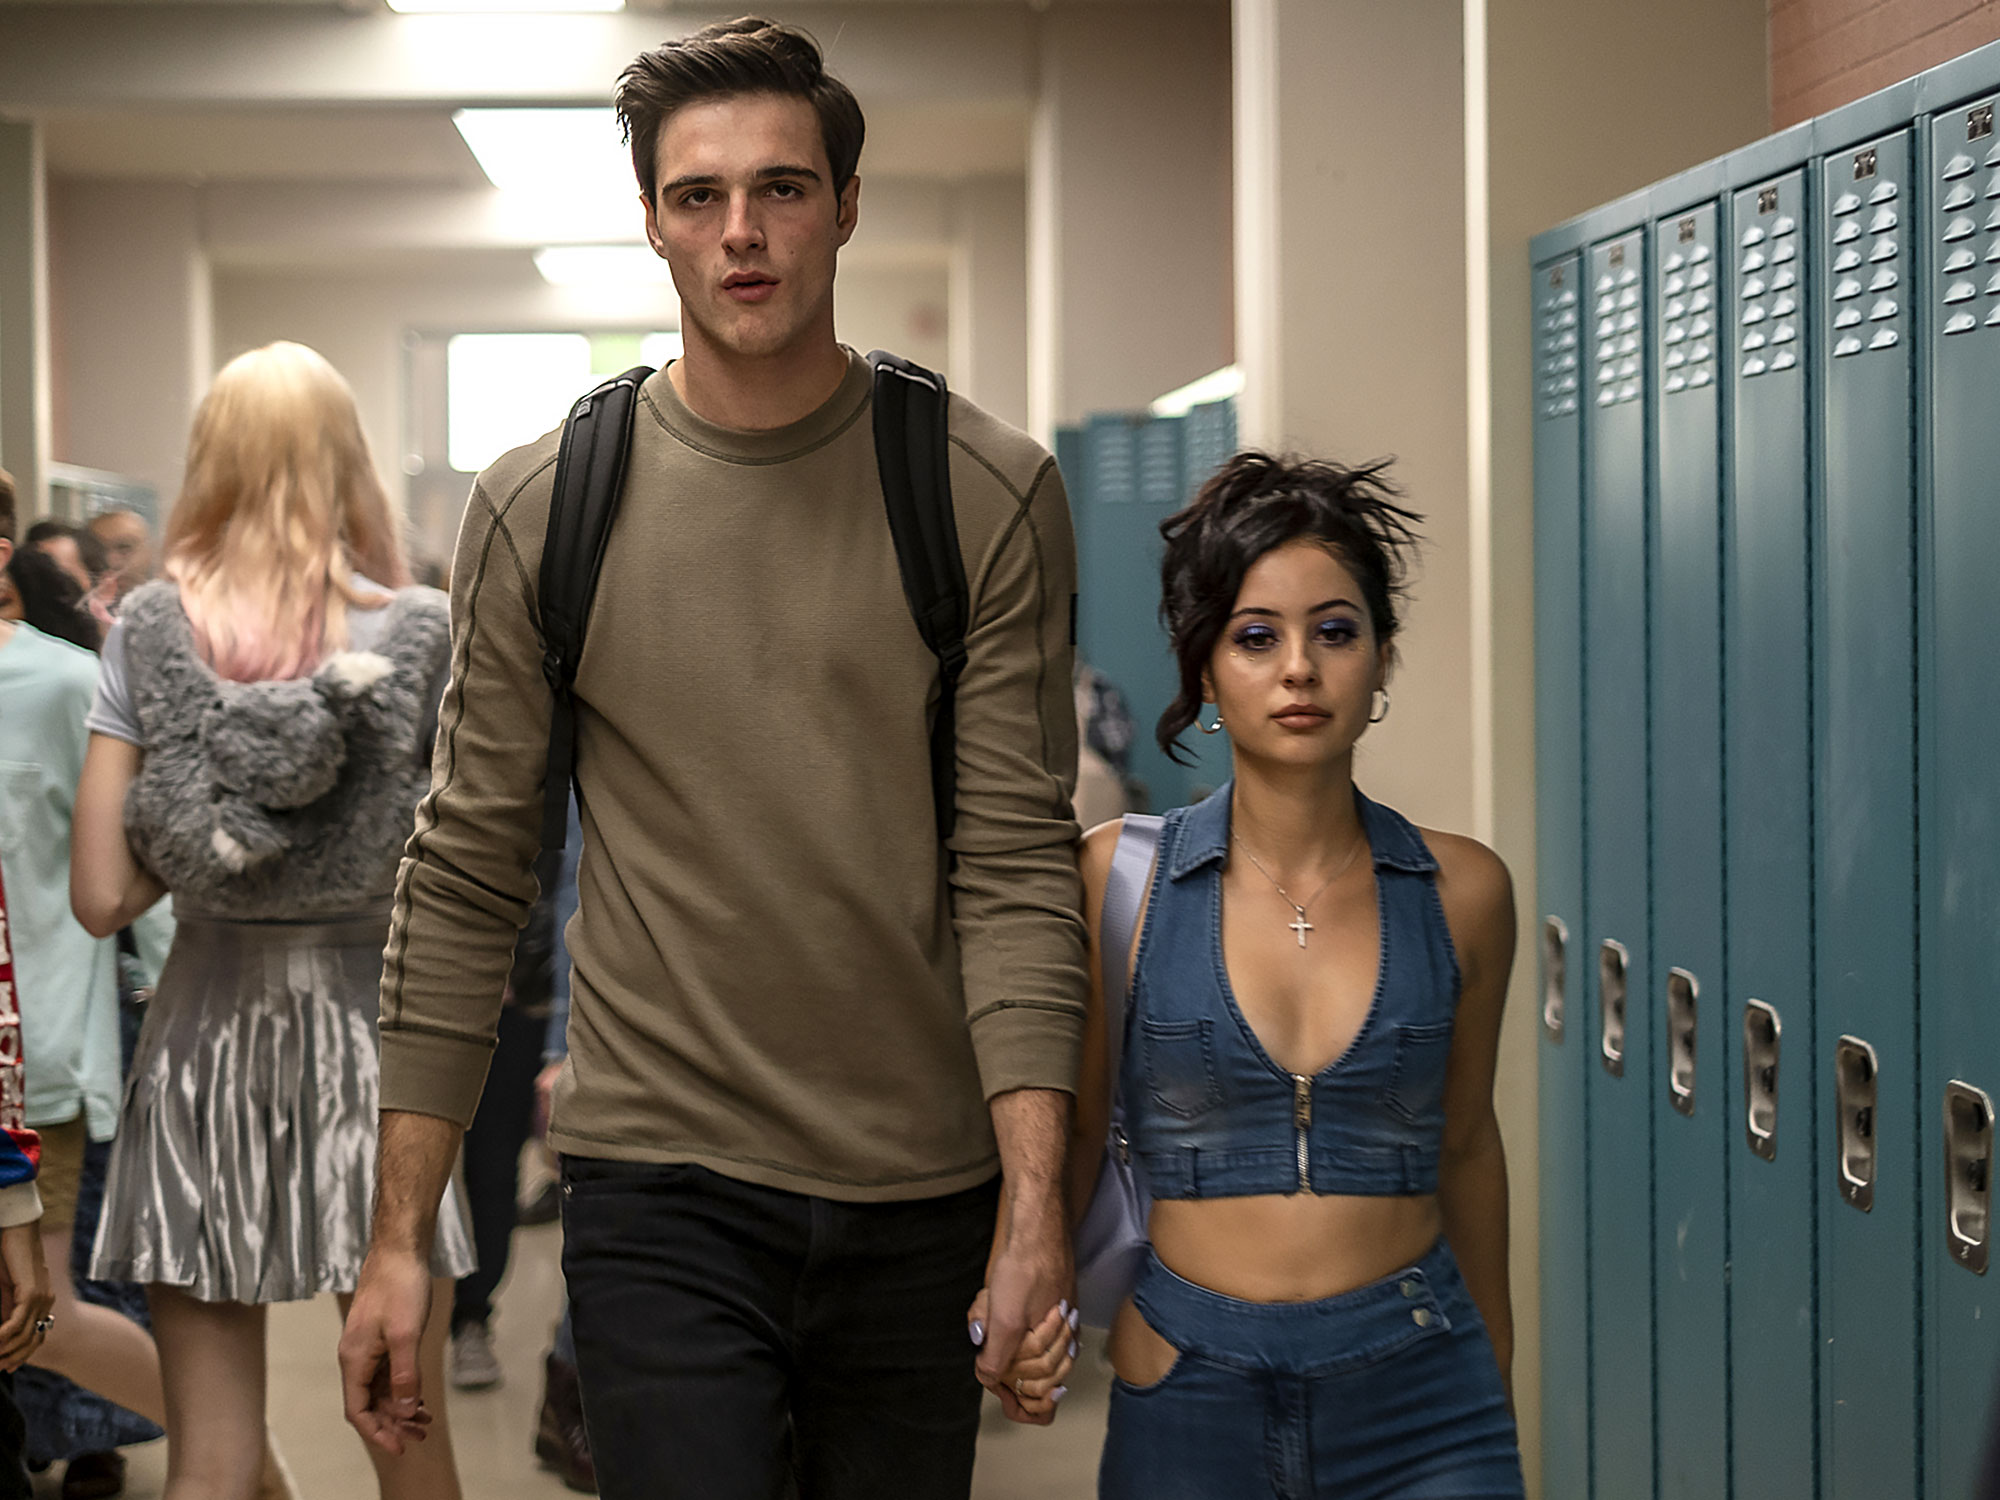 Euphoria' Season 2 Is Almost Here. Let's Review Where It Left Off